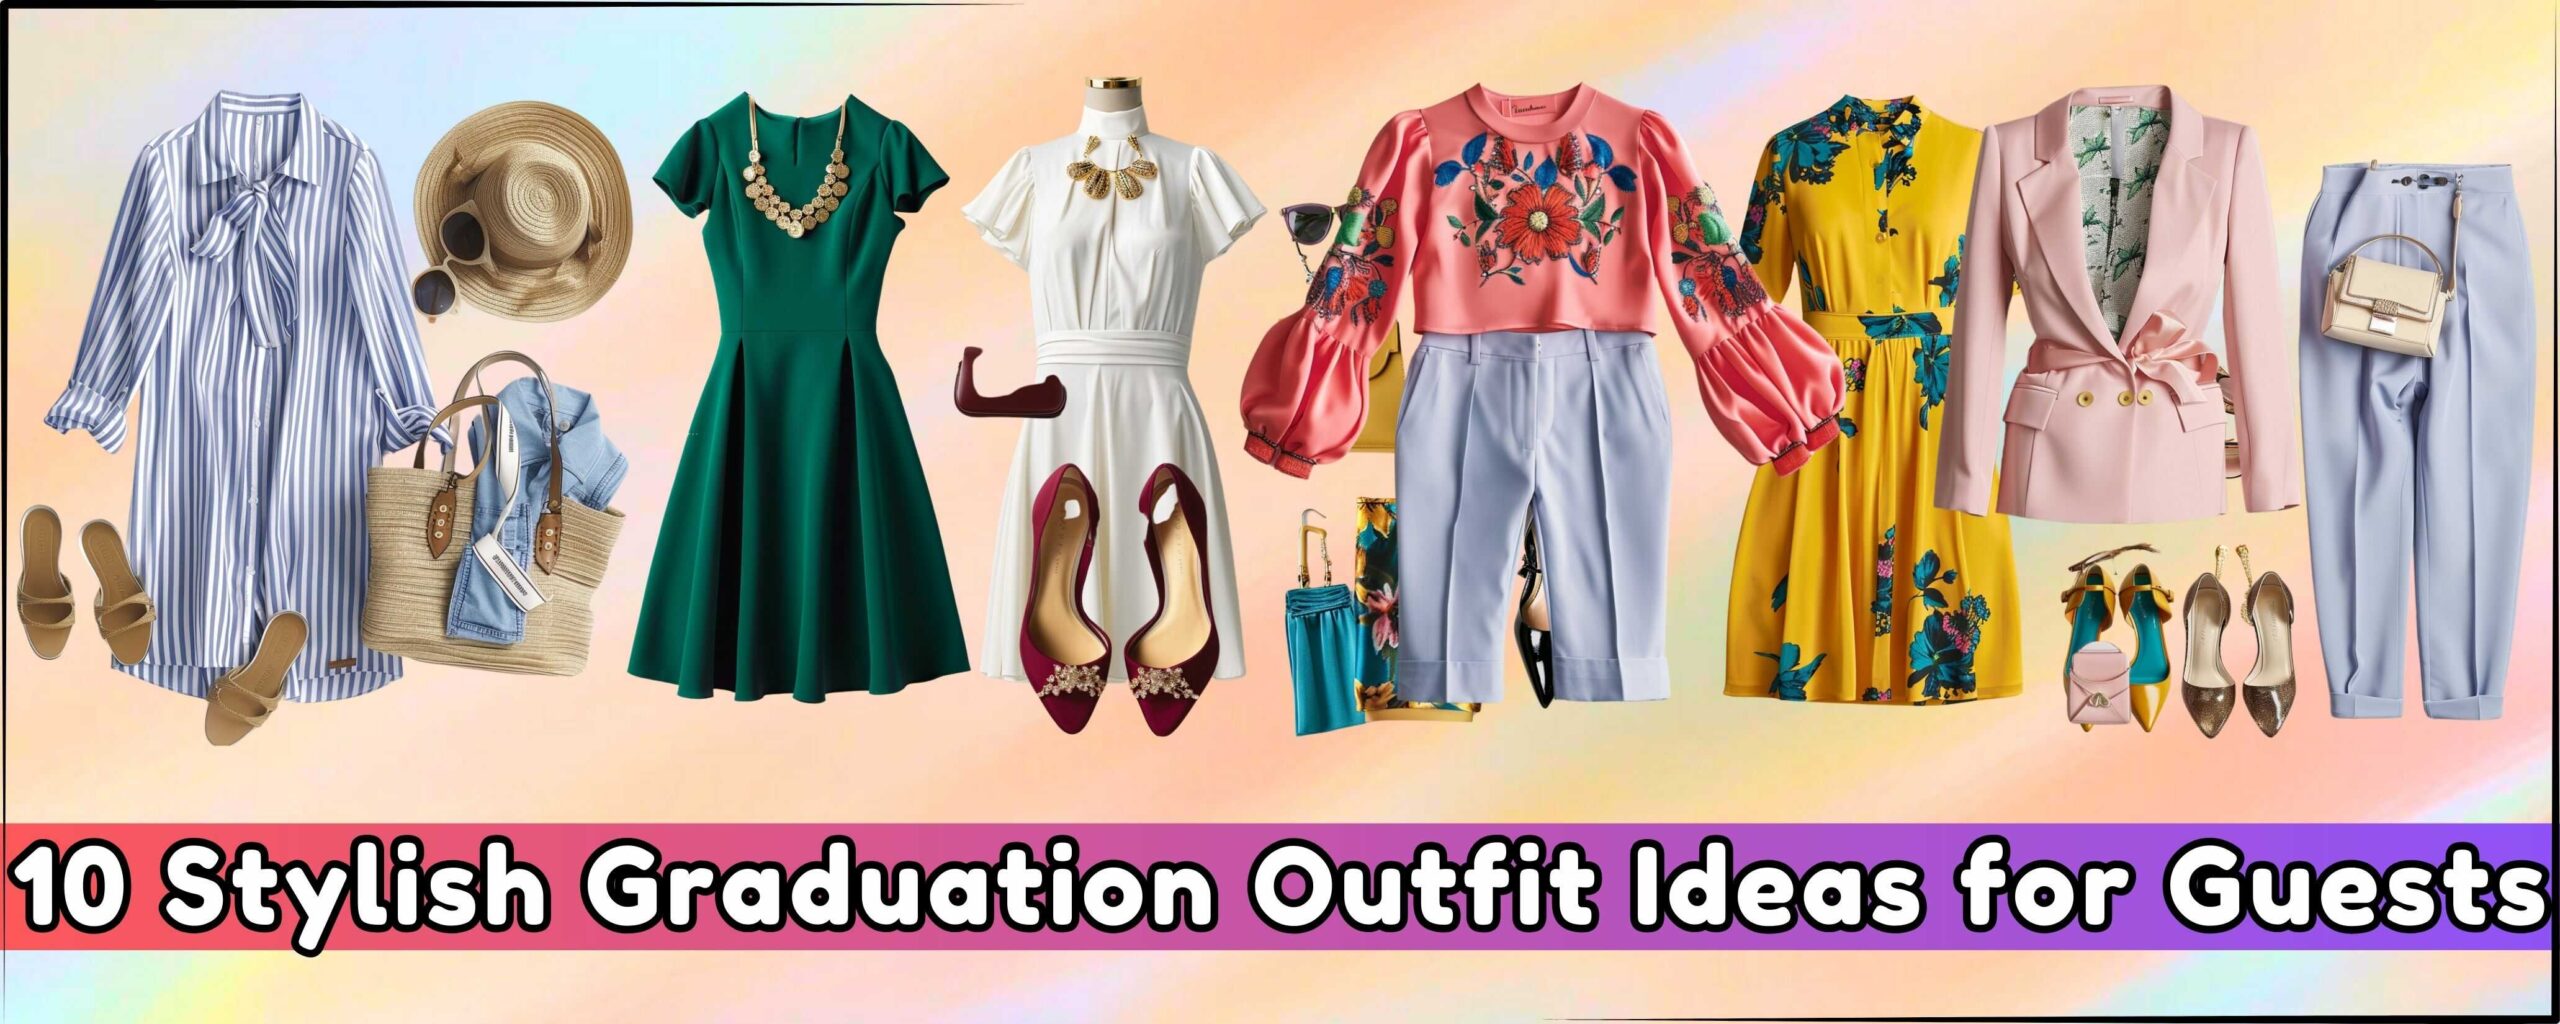 Stylish Graduation Outfit Ideas for Guests